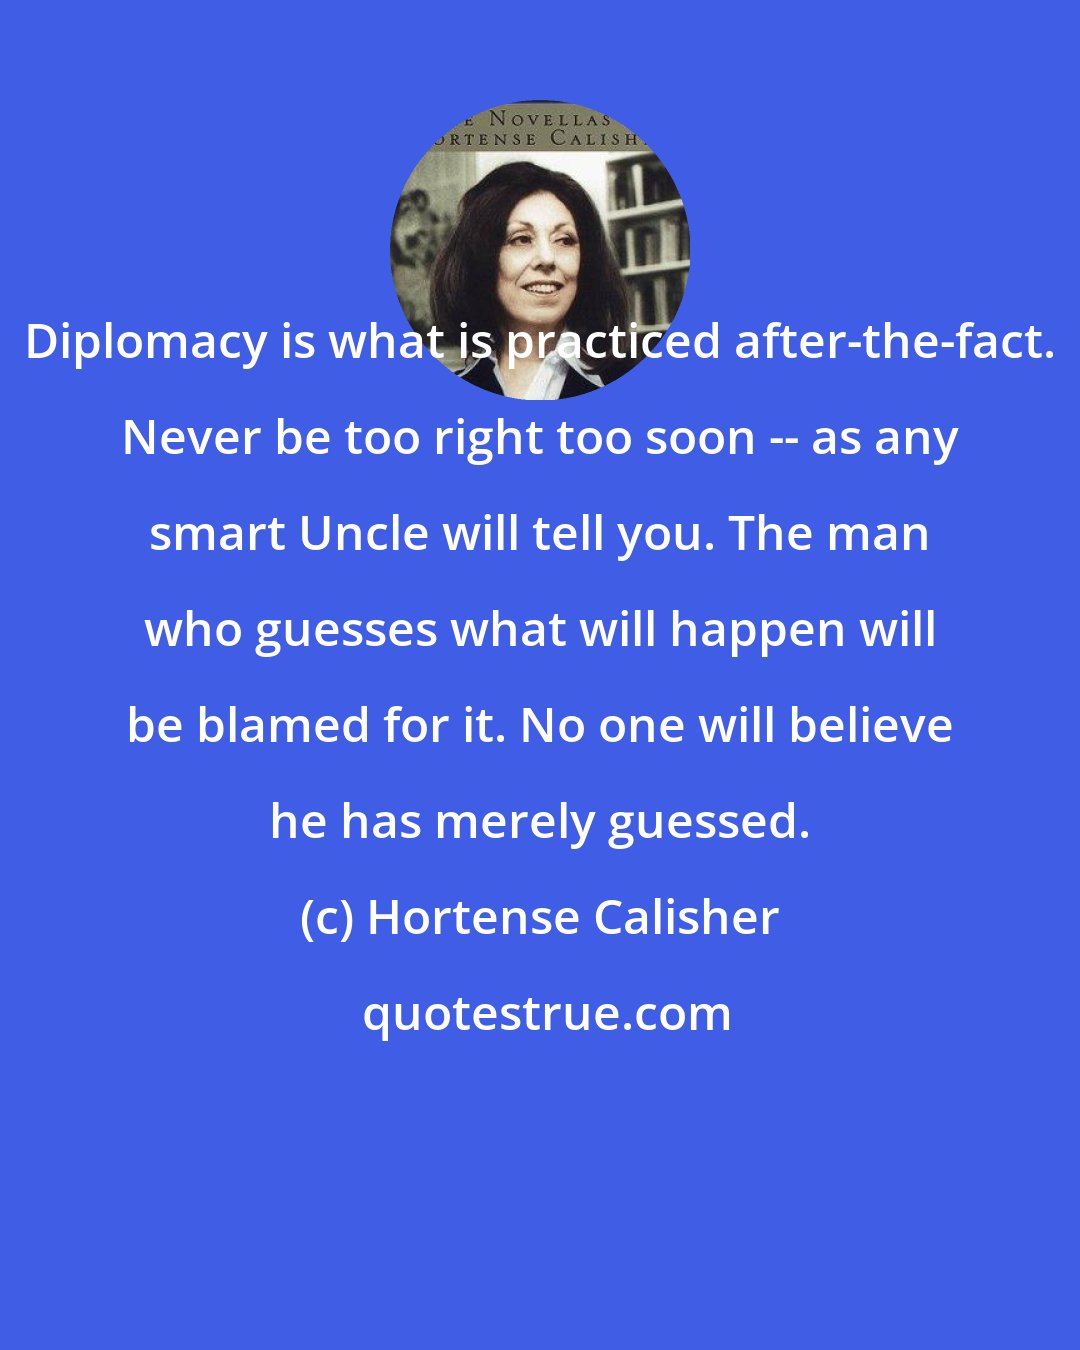 Hortense Calisher: Diplomacy is what is practiced after-the-fact. Never be too right too soon -- as any smart Uncle will tell you. The man who guesses what will happen will be blamed for it. No one will believe he has merely guessed.